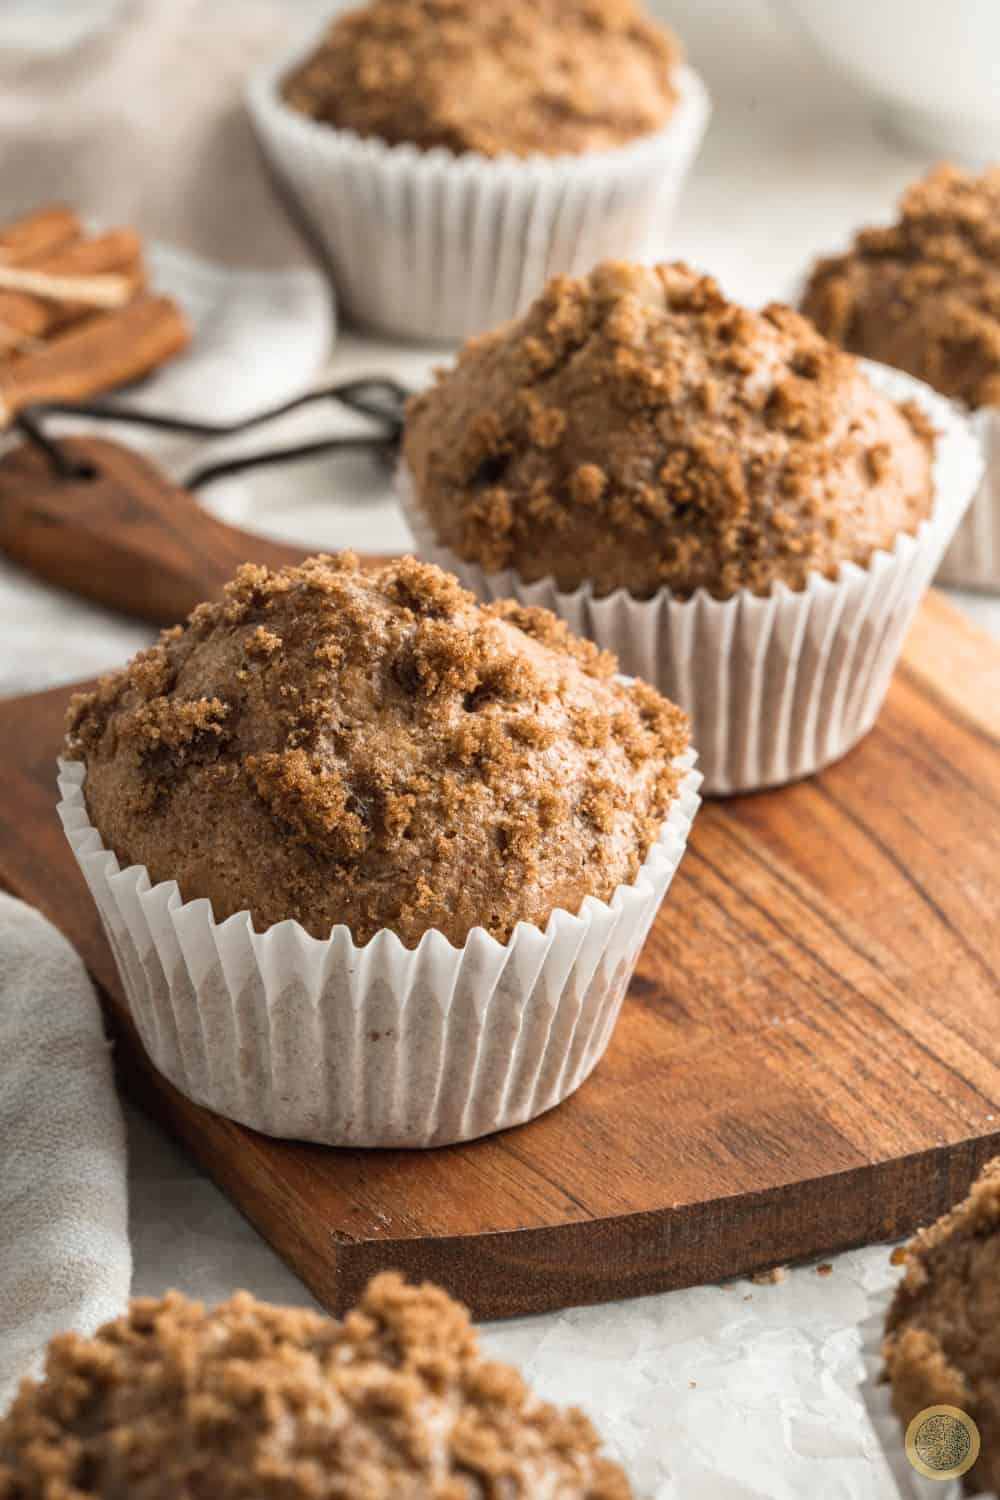 Let the vegan muffins cool for 10 minutes